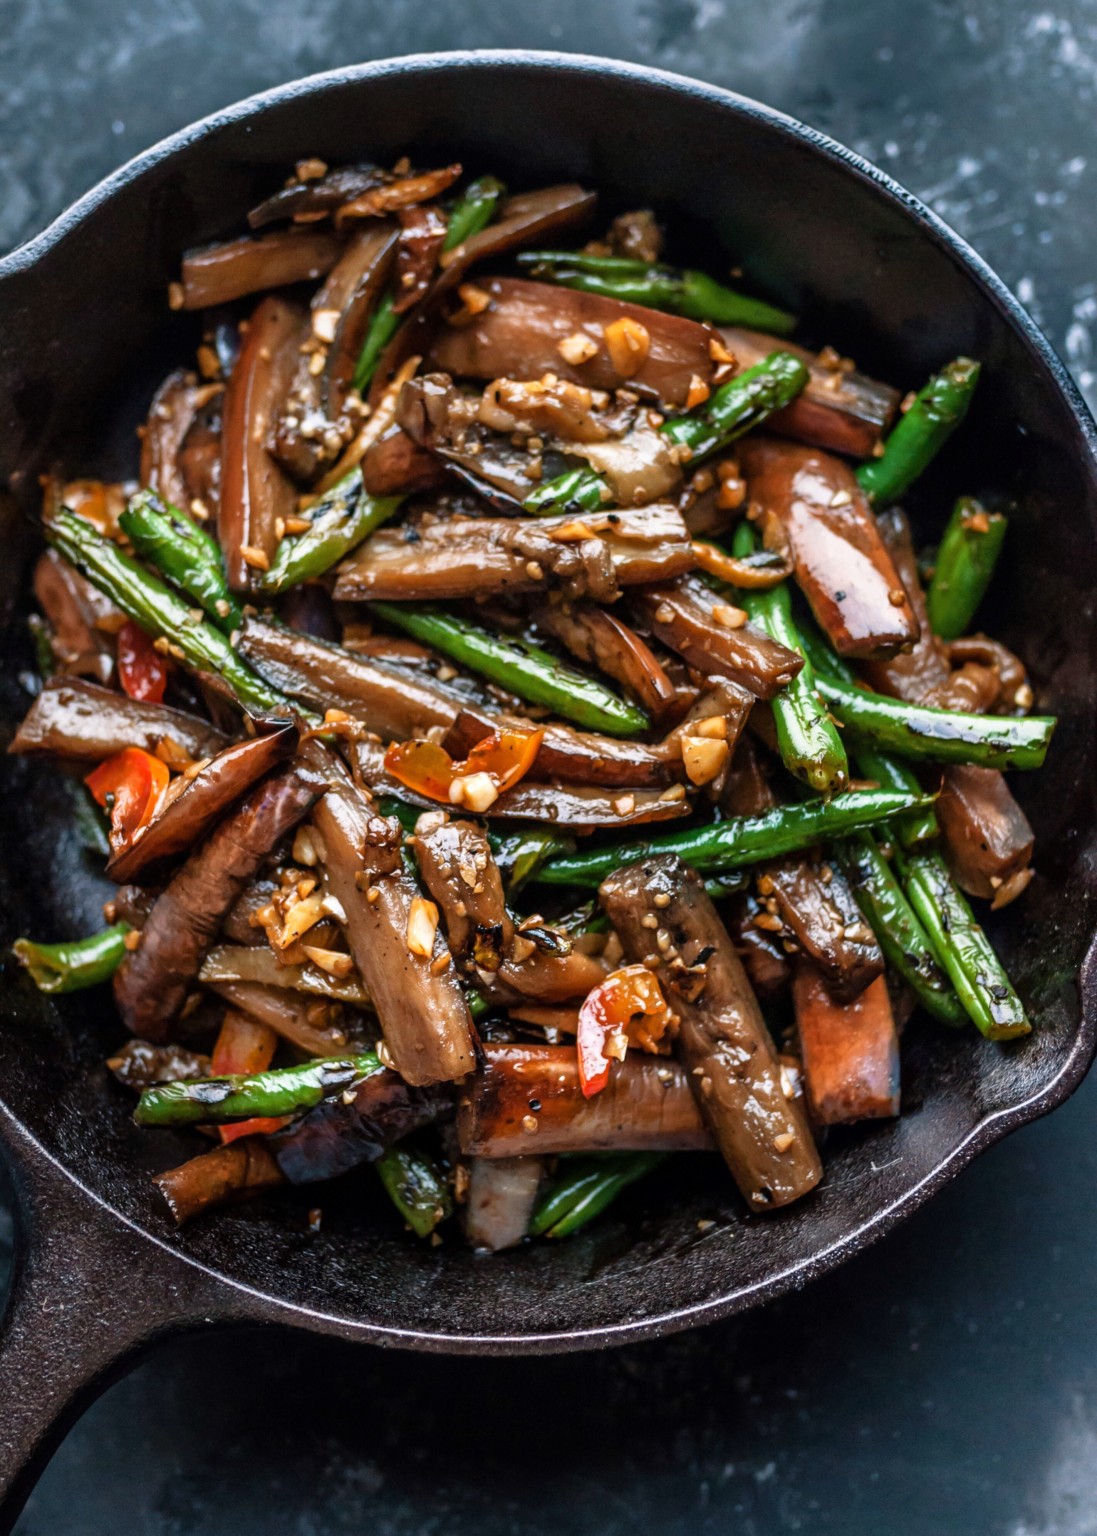 Chinese Stir-Fried Eggplant and Green Beans